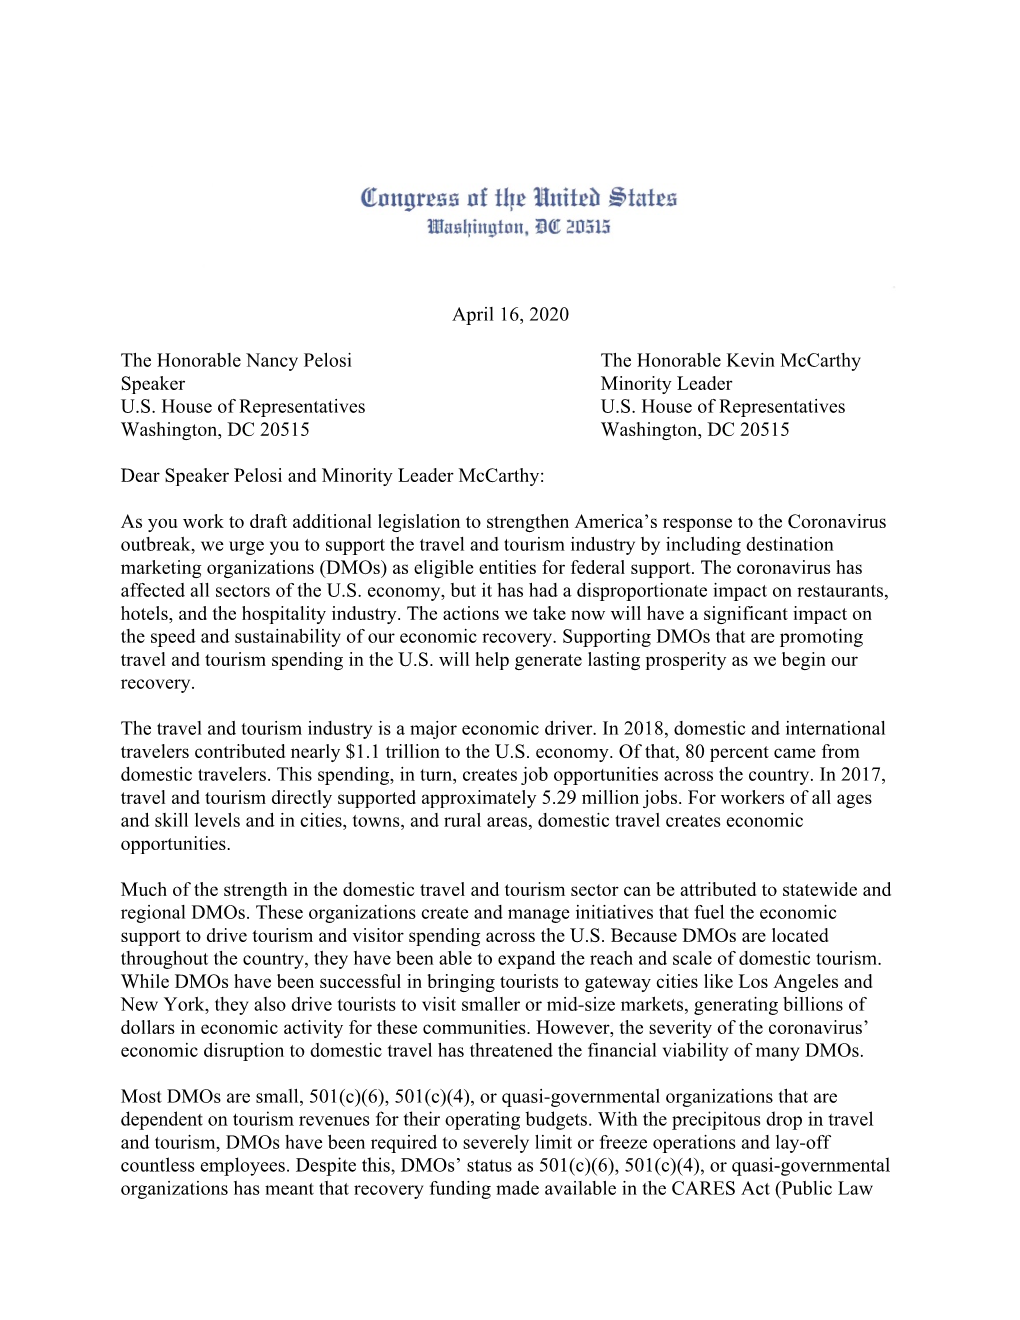 House Dear Colleague Letter in Support of Dmos